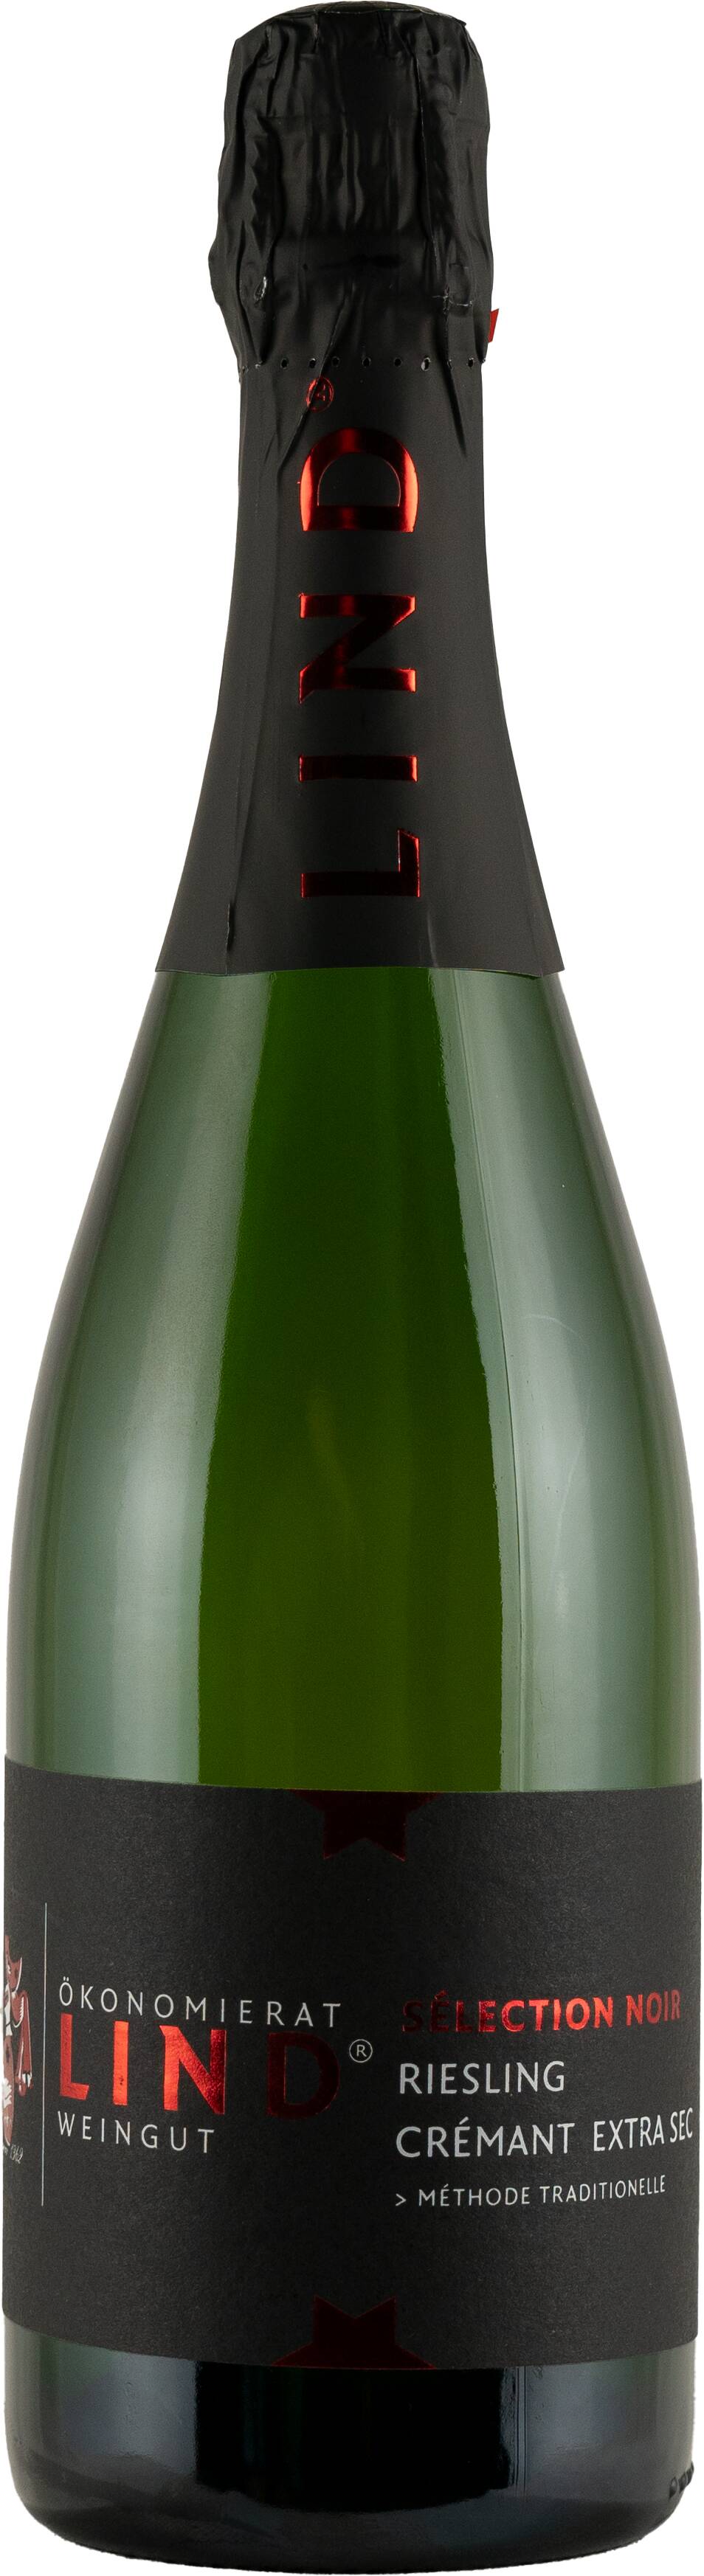 Riesling Crémant Extra Sec  2021